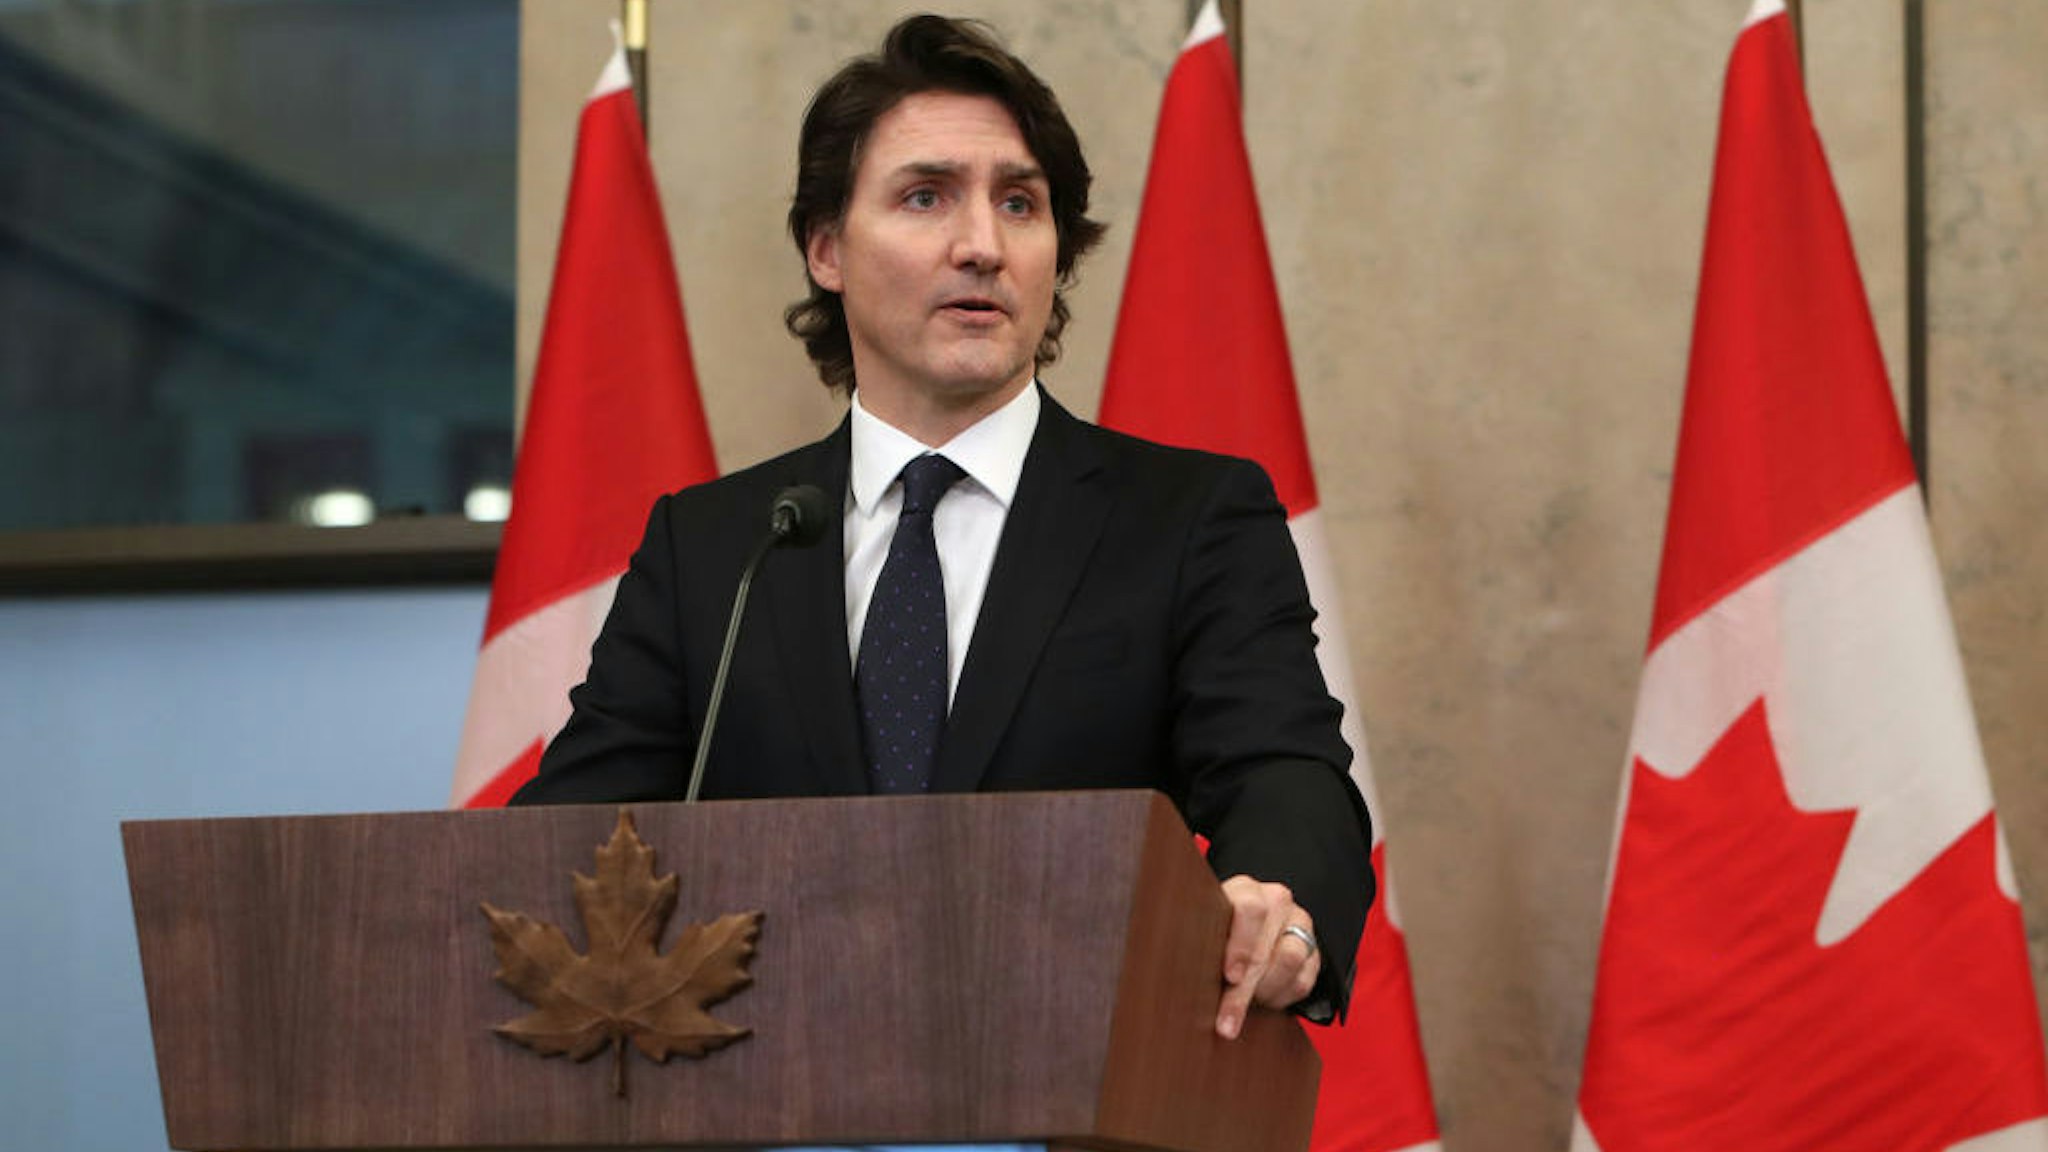 Justin Trudeau, Canada's prime minister, speaks during a news conference on Parliament Hill in Ottawa, Ontario, Canada, on Friday, Feb. 11, 2022. Trudeau warned that demonstrators will face "real consequences" if they continue blockades in Ottawa and at the U.S. border, while using more conciliatory language in an attempt to help defuse the situation. Photographer: David Kawai/Bloomberg